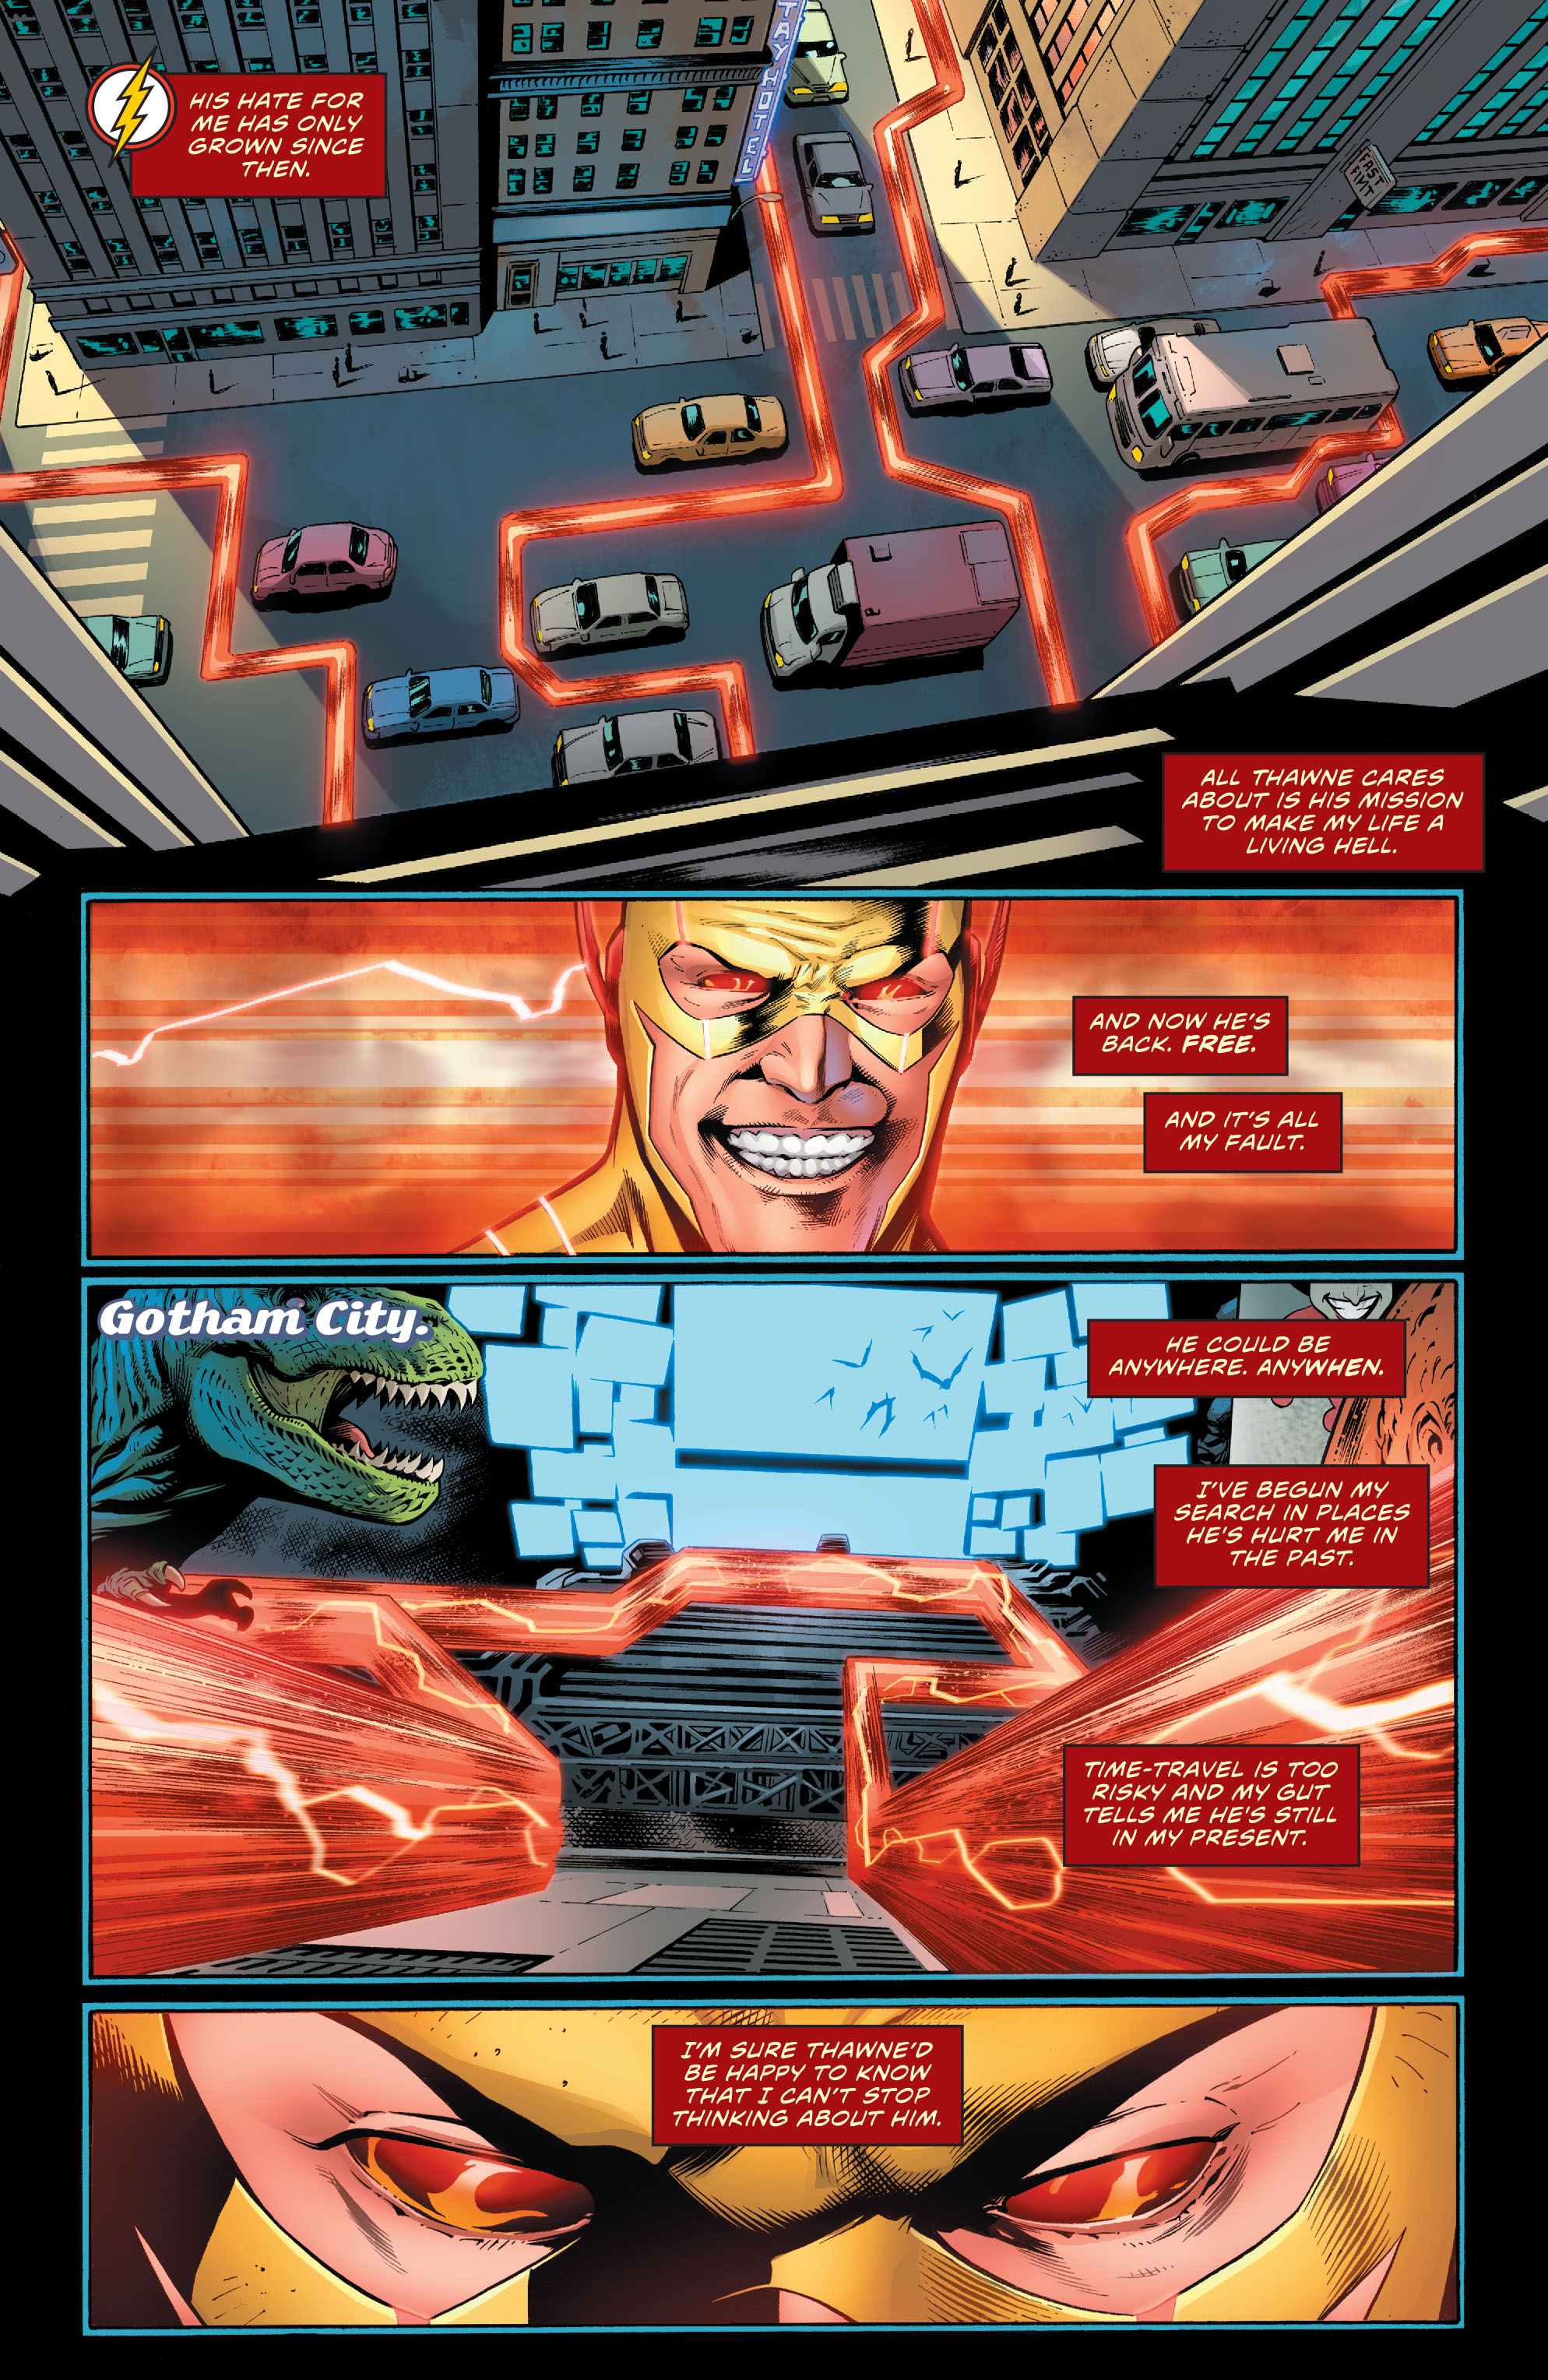 The Flash (2016-): Chapter 757 - Page 4